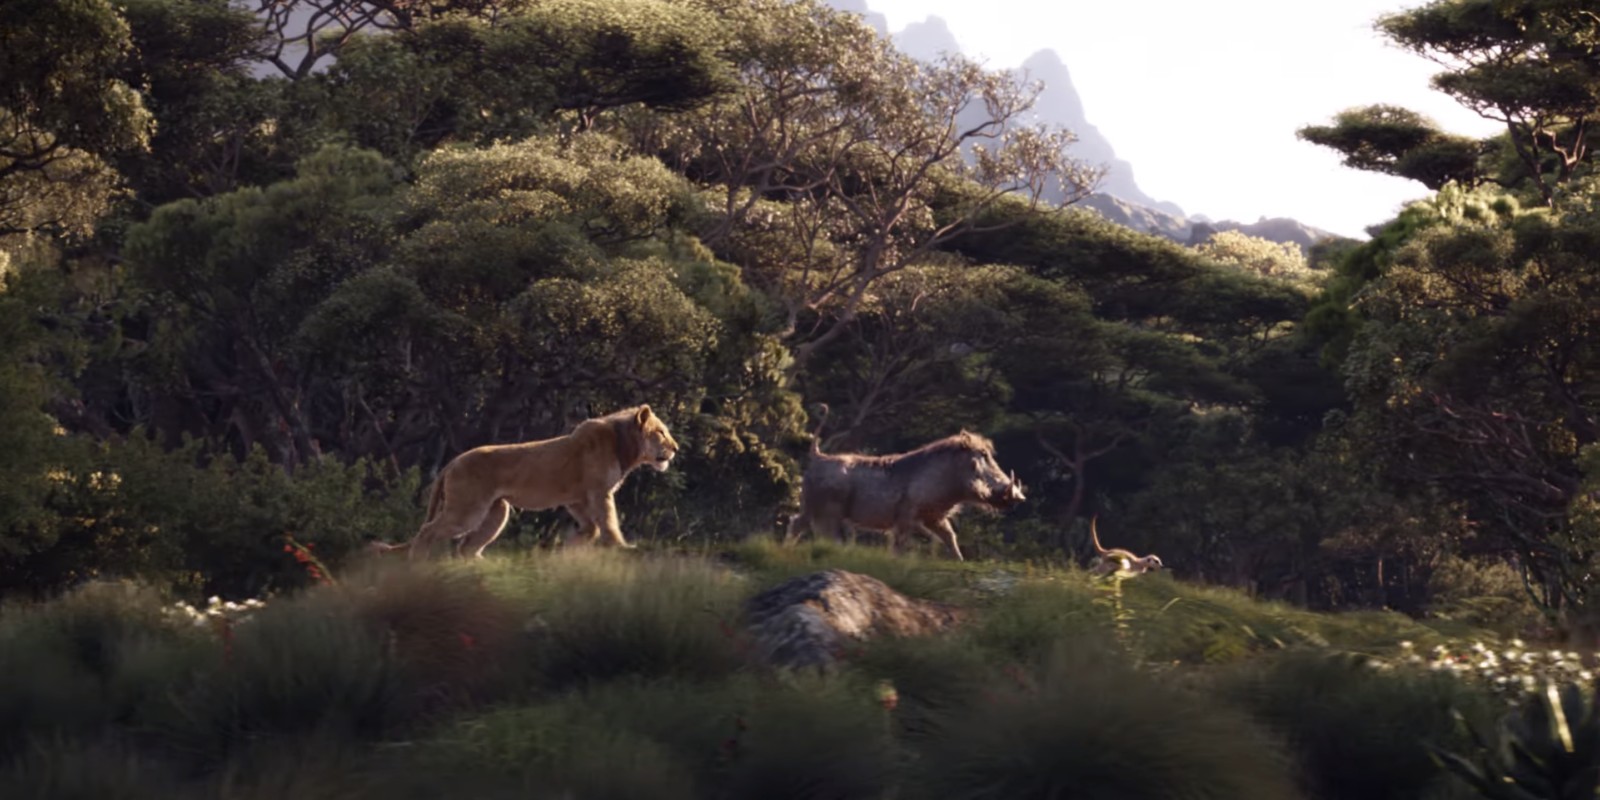 Exploring the best live-action Disney movie between The Lion King and The Jungle Book.